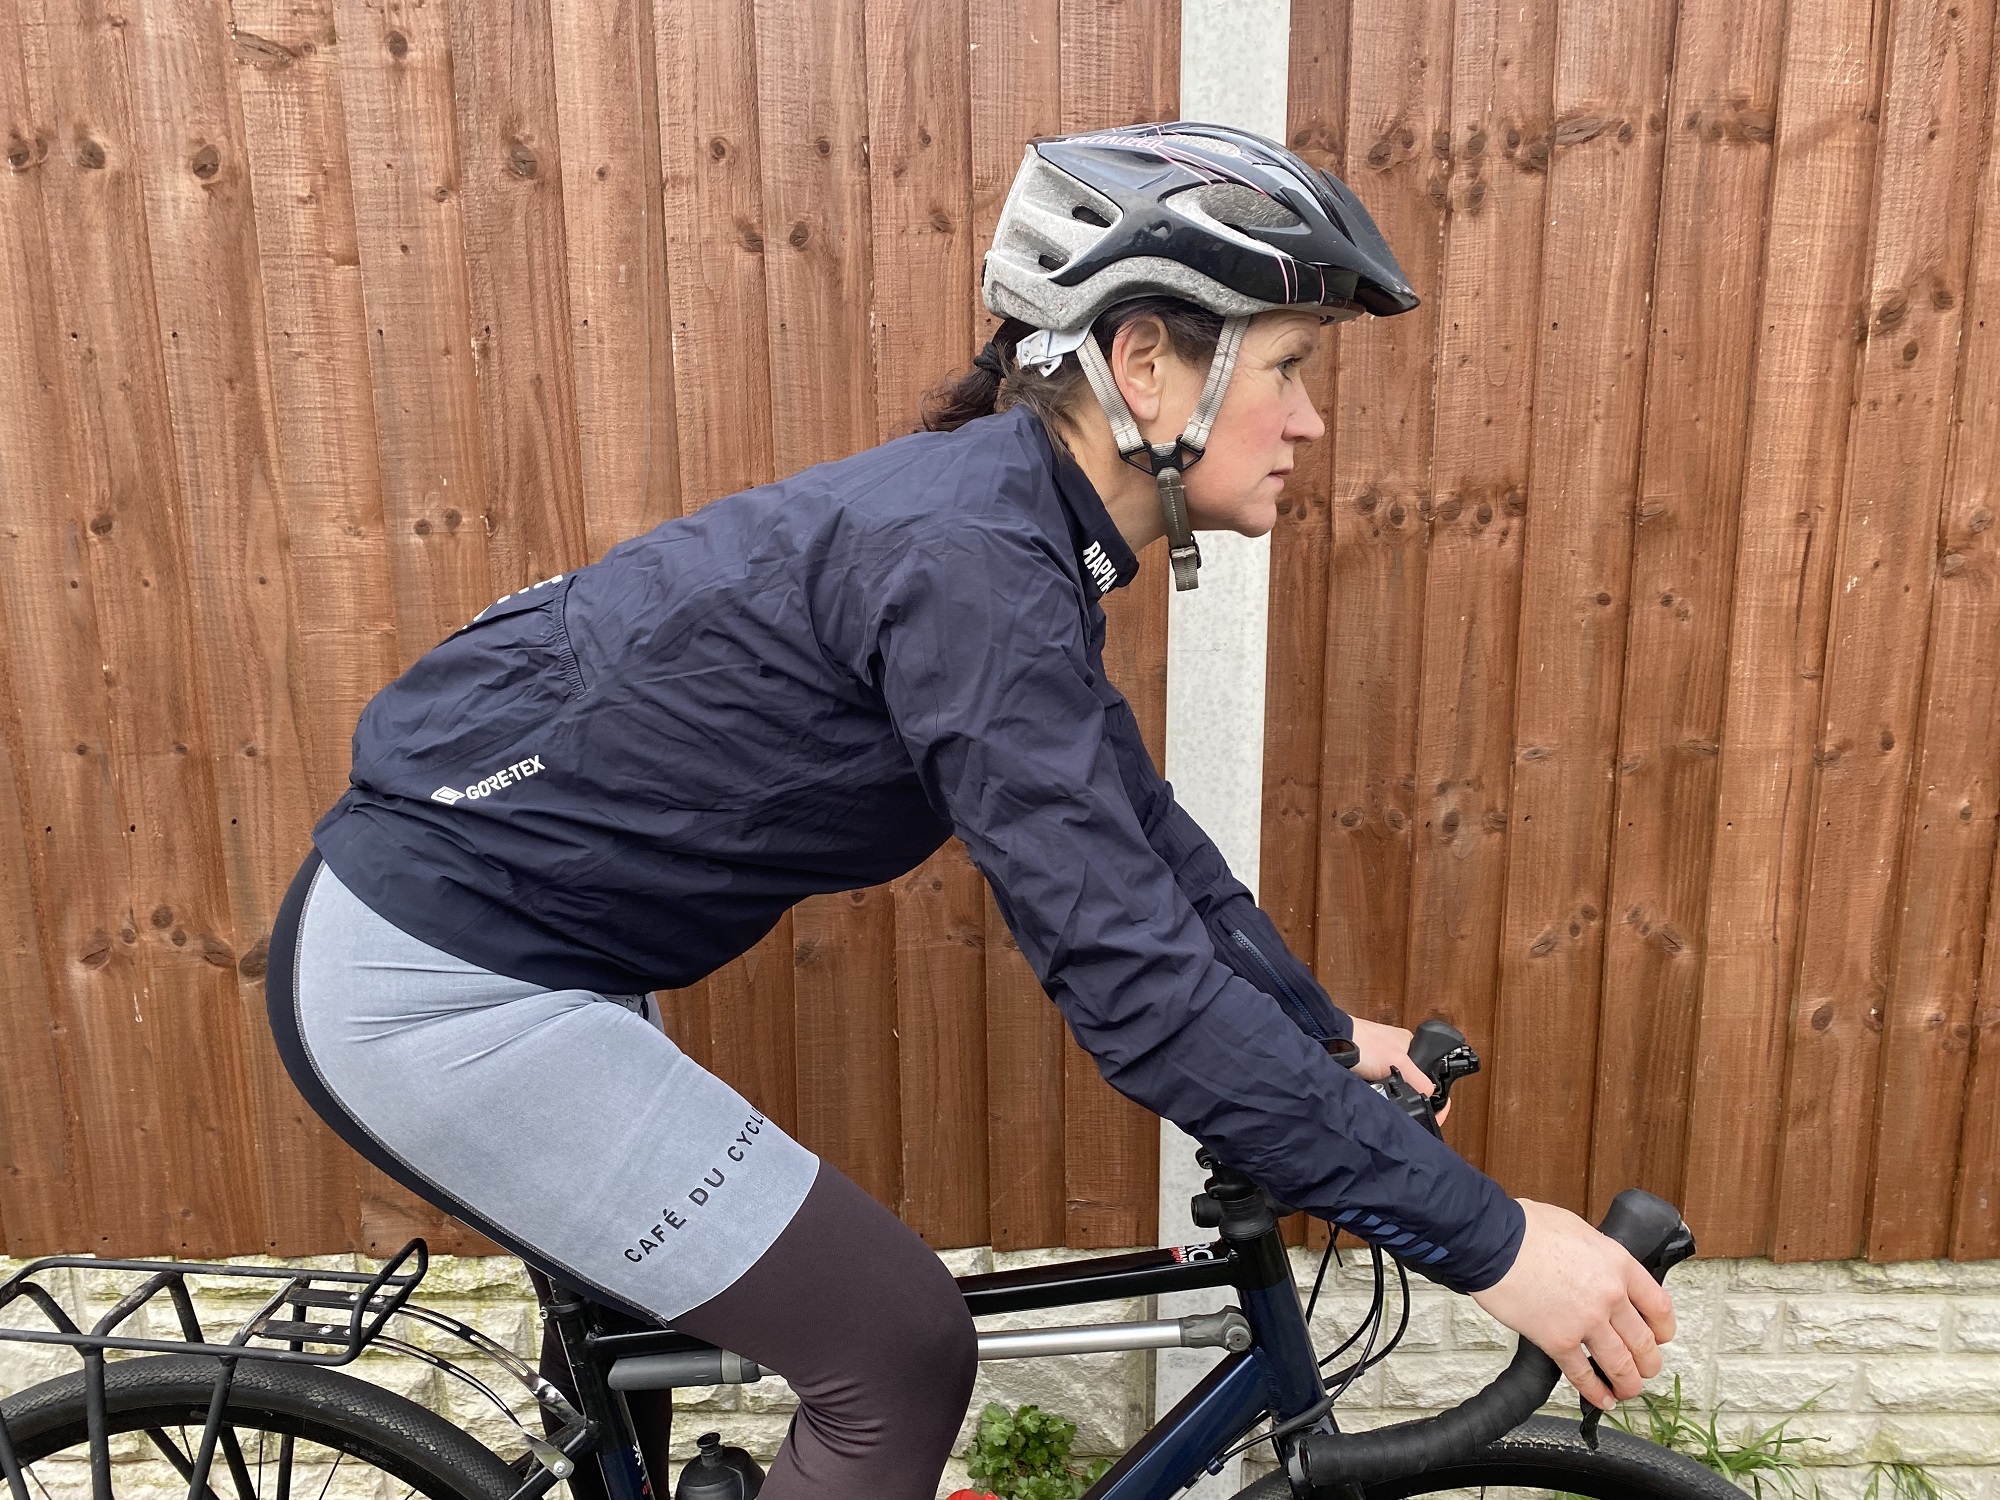 Getting warmer: a review of the Rapha women's winter collection 